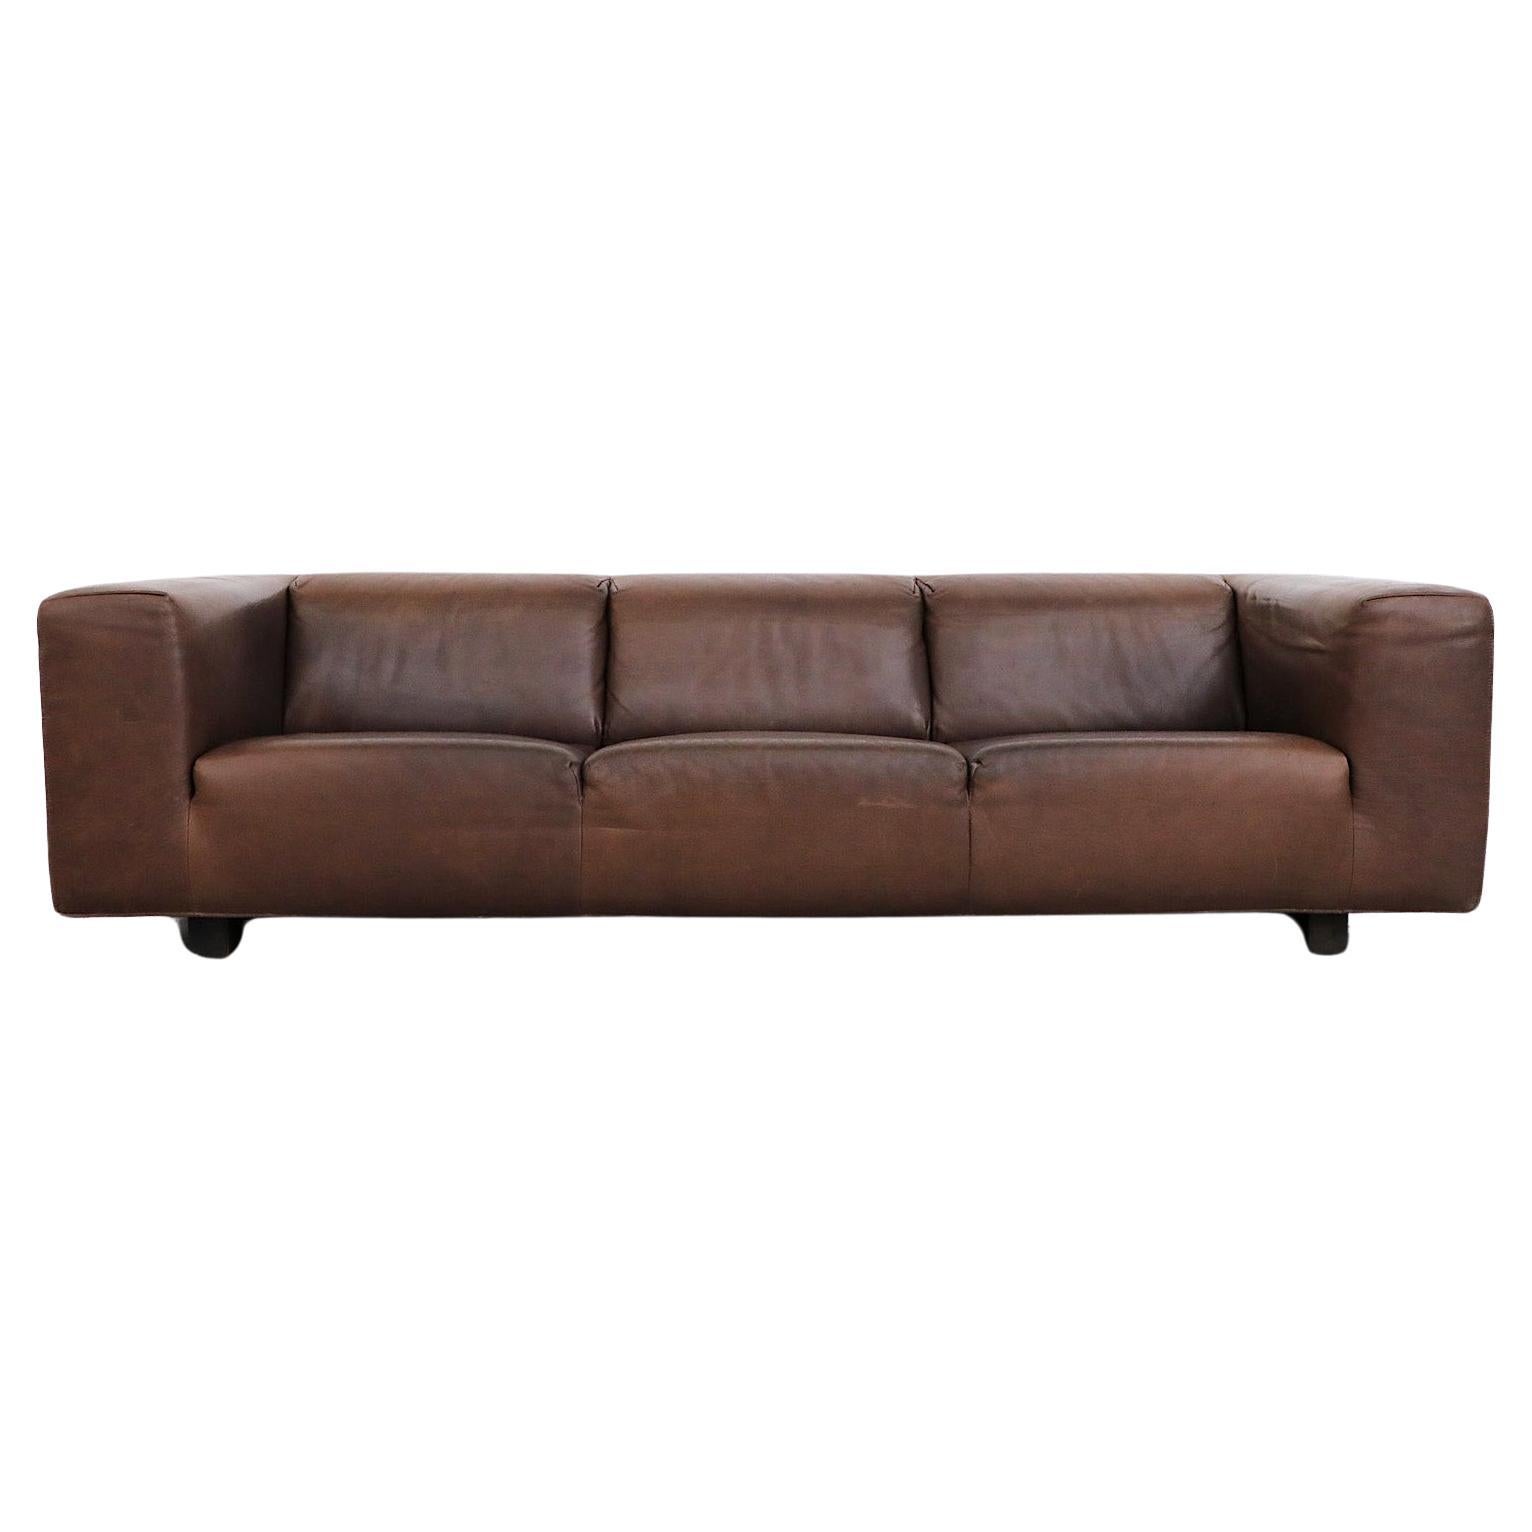 Mid-Century Brown Leather 'Bommel' Sofa by Gerard van den Berg for LABEL, 1985 For Sale